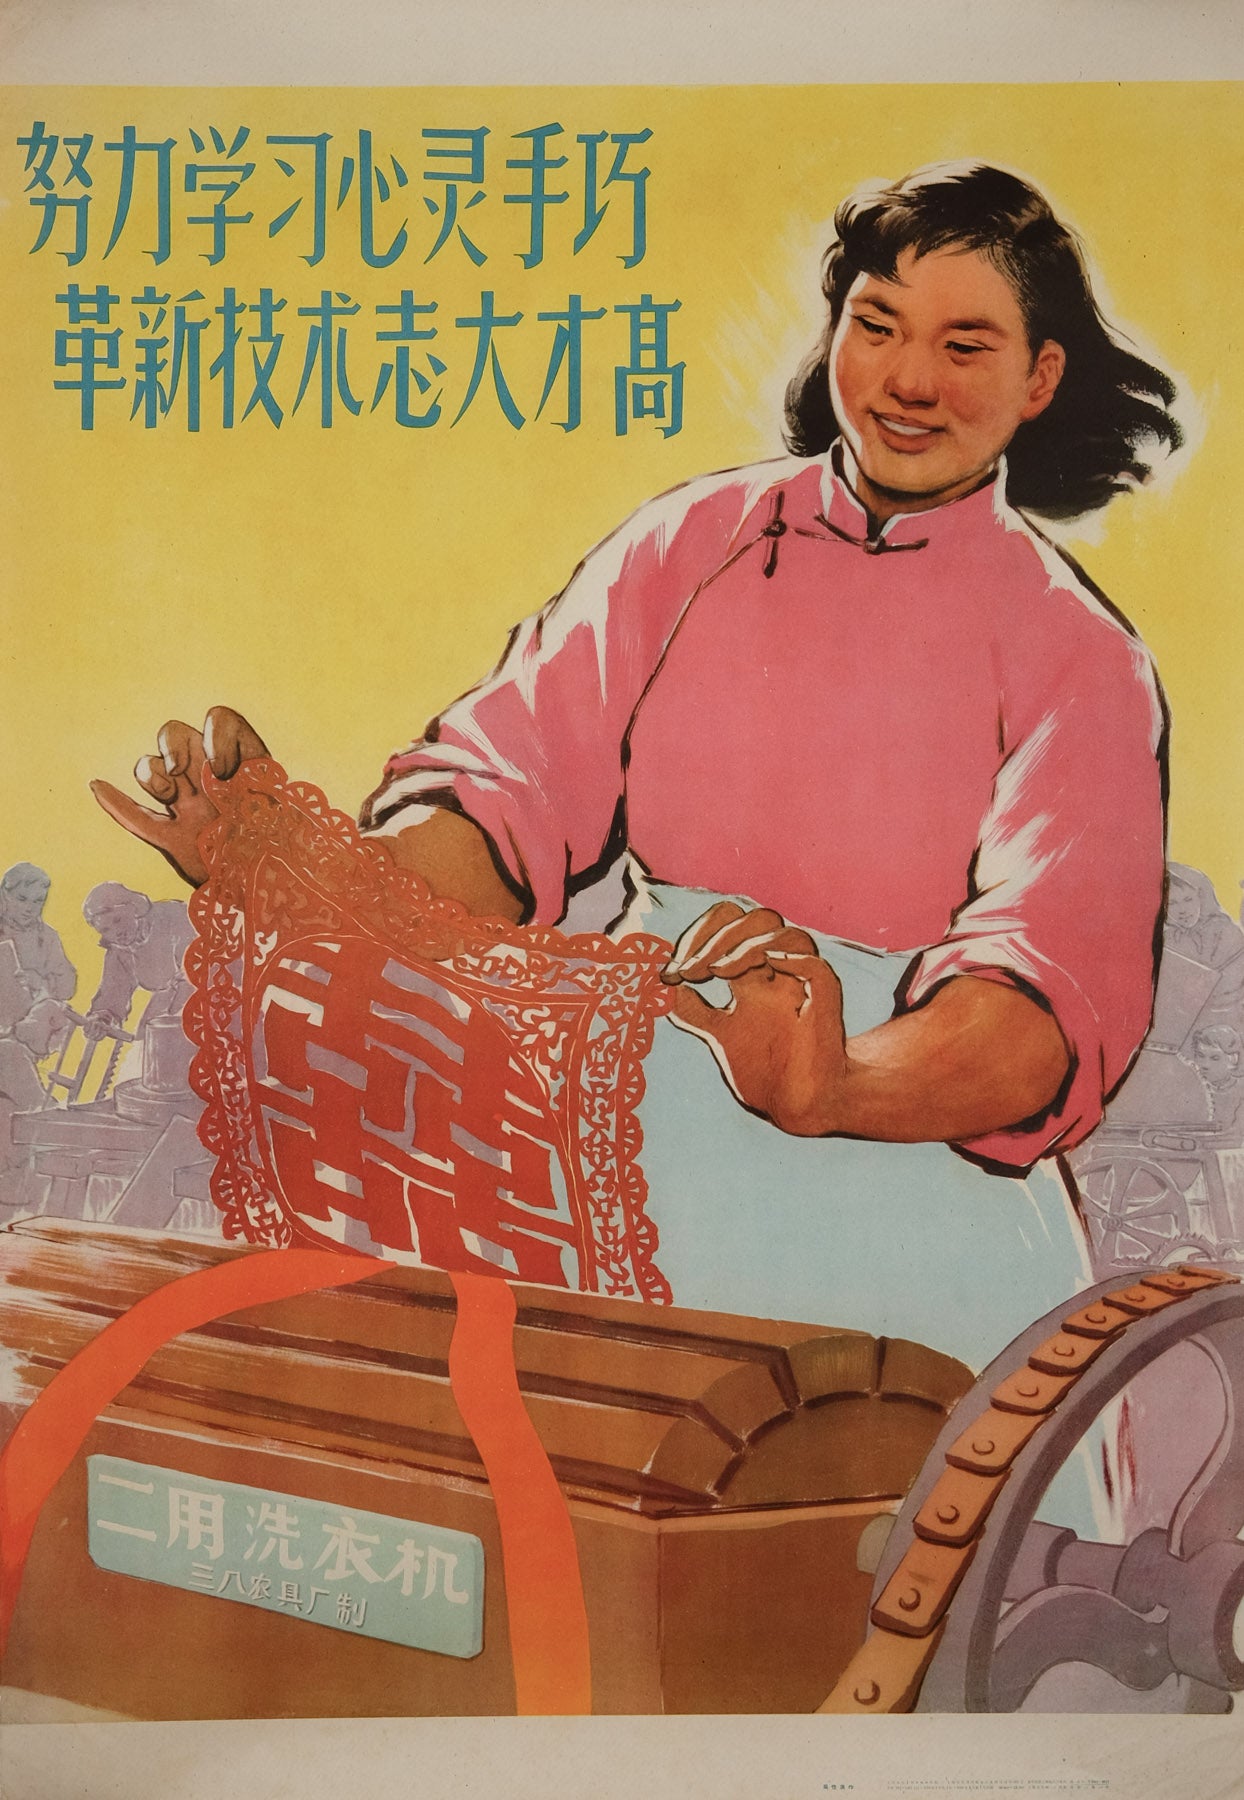 original vintage 1959 Chinese communist propaganda poster Study hard to become capable and dexterous, revolutionary technologies enable great ambition and talent by Wu Xingqing